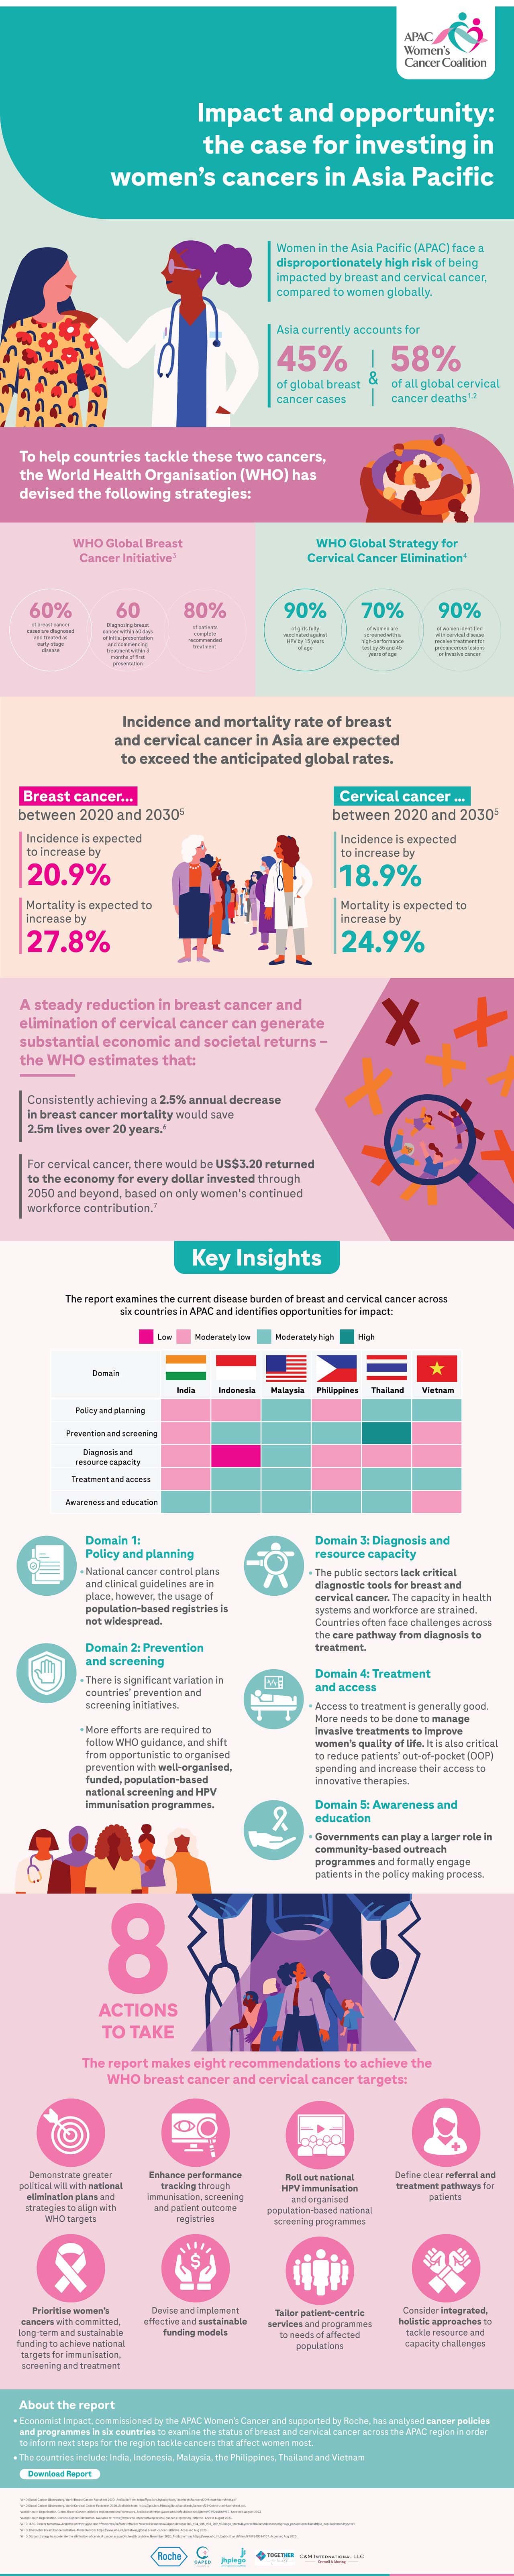 Impact and opportunity: the case for investing in women’s cancers in Asia Pacific